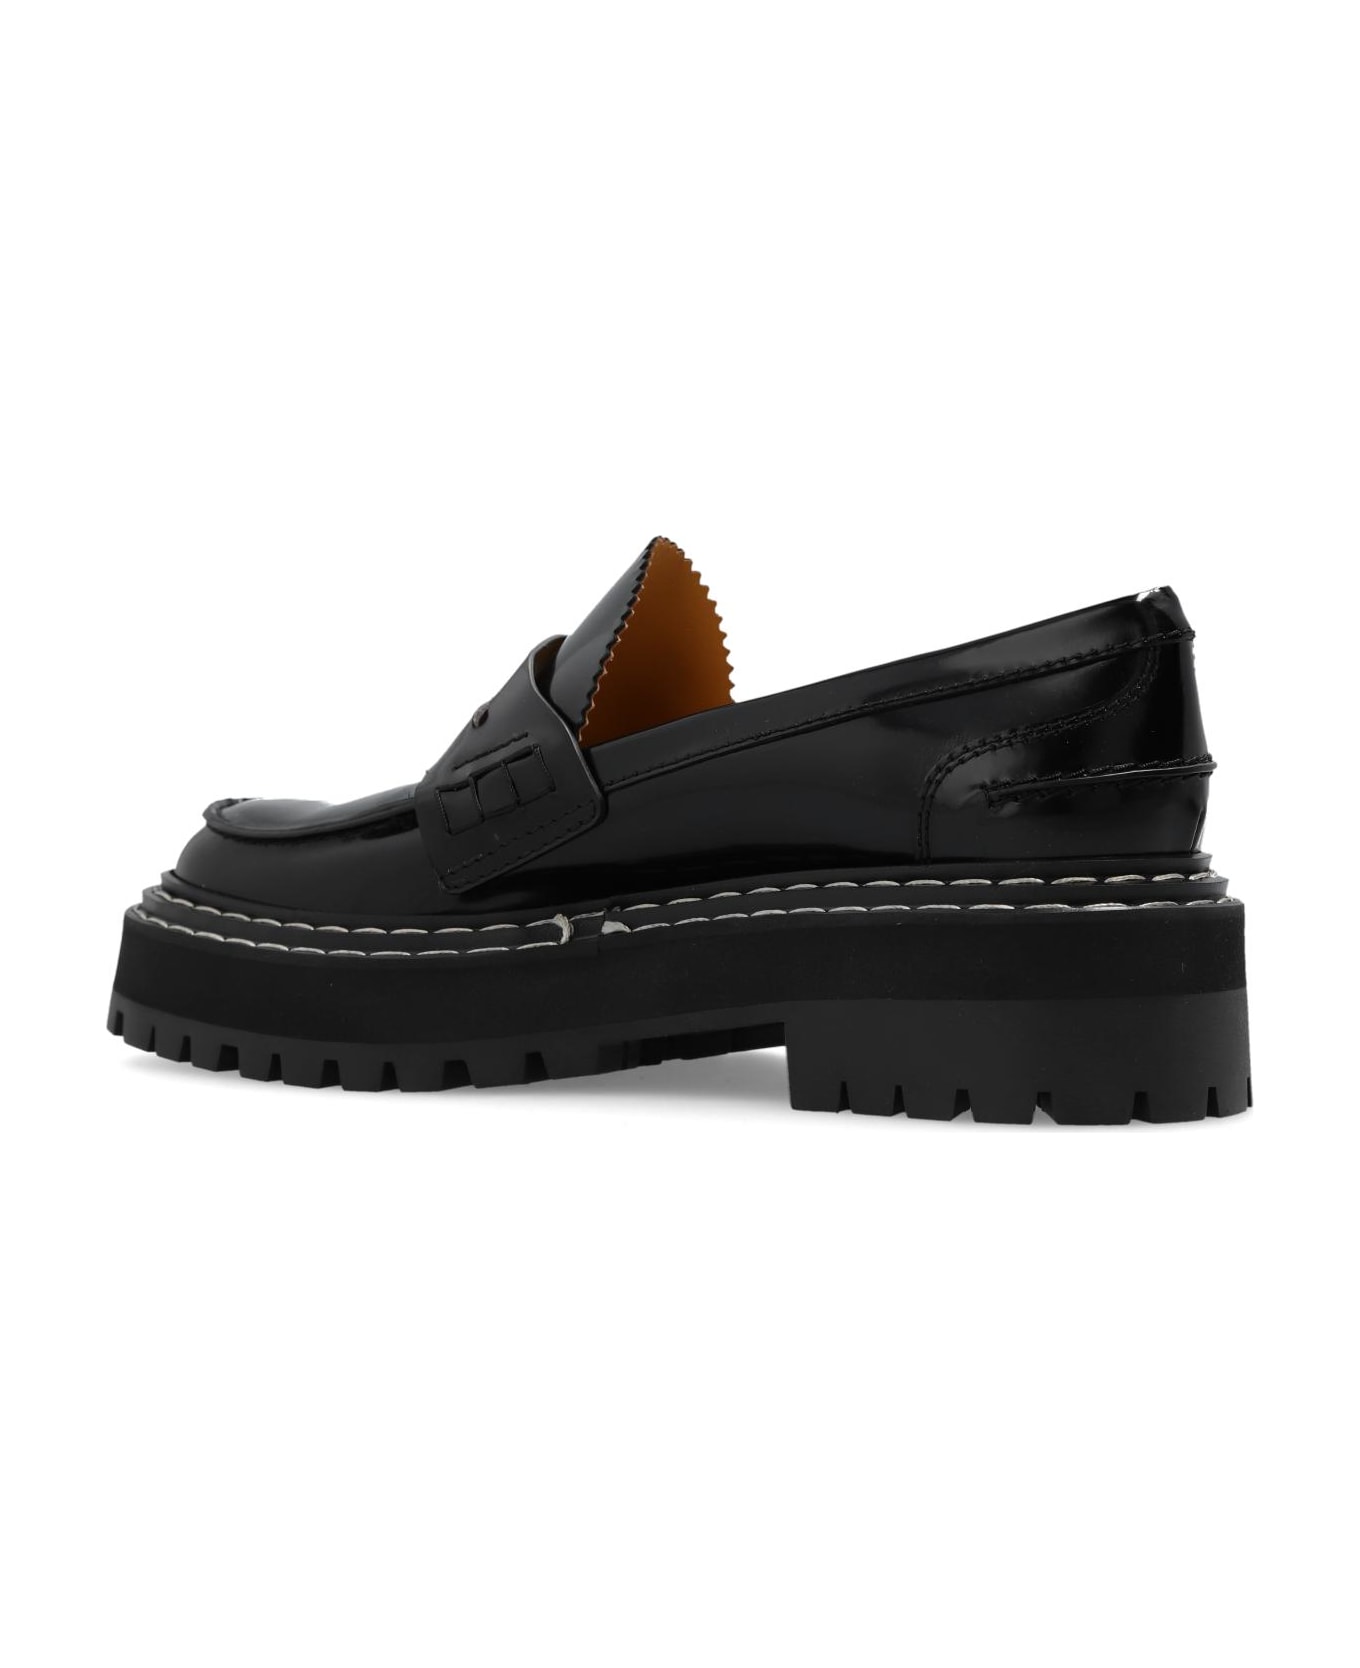 Proenza Schouler Leather Loafers - Black フラットシューズ